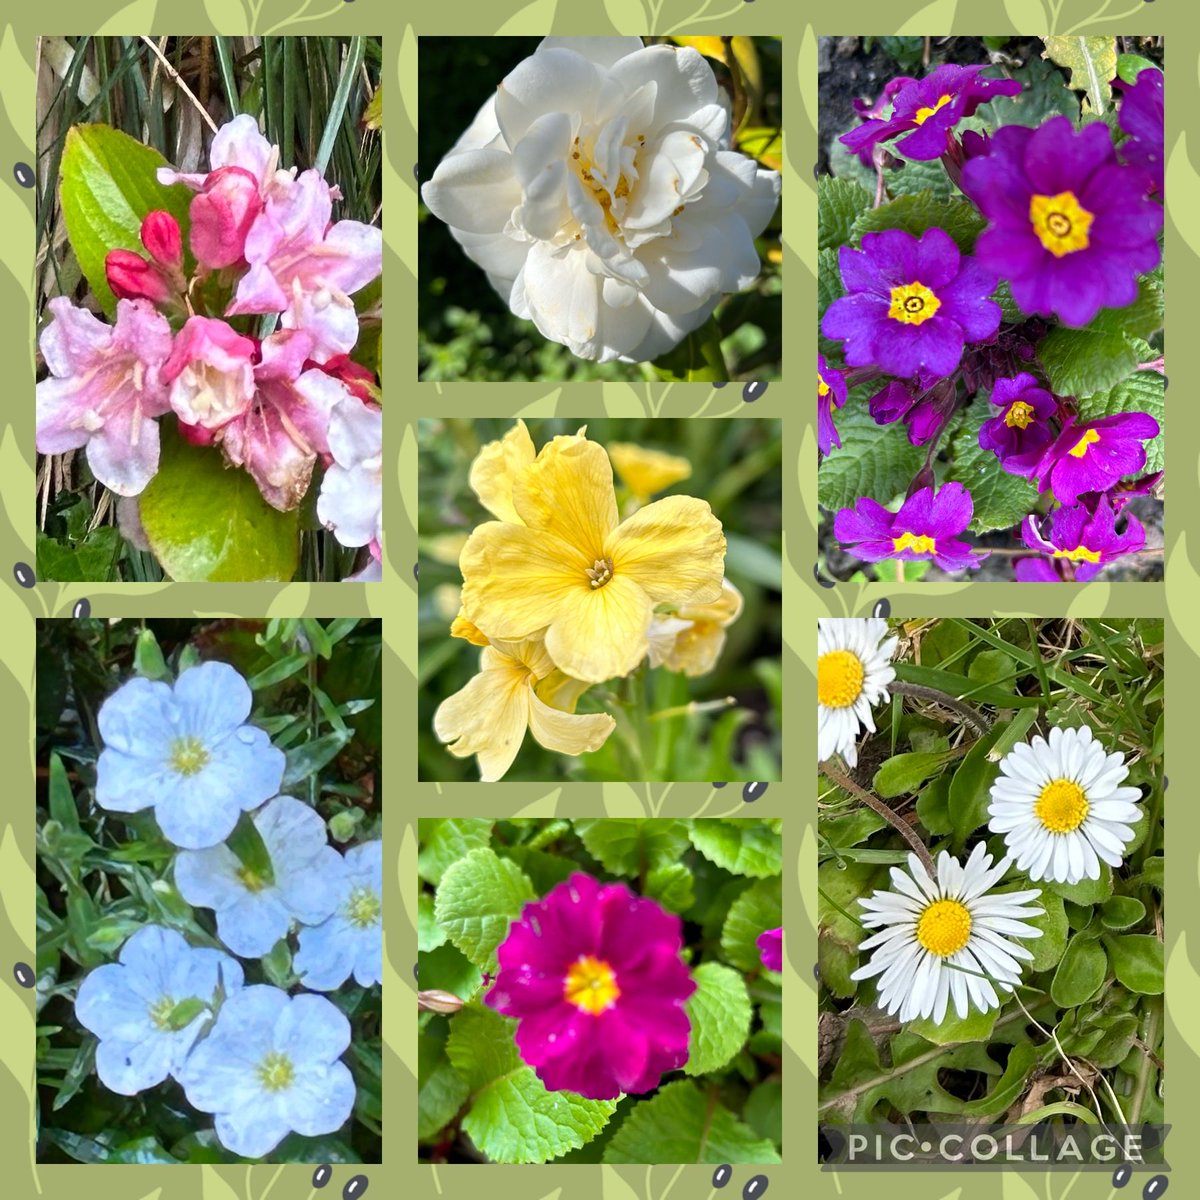 Sun shining, blue sky today, hooray. Some pretty and colourful flowers from this past week. #SevenonSunday #Gardeningtwitter #Flowers